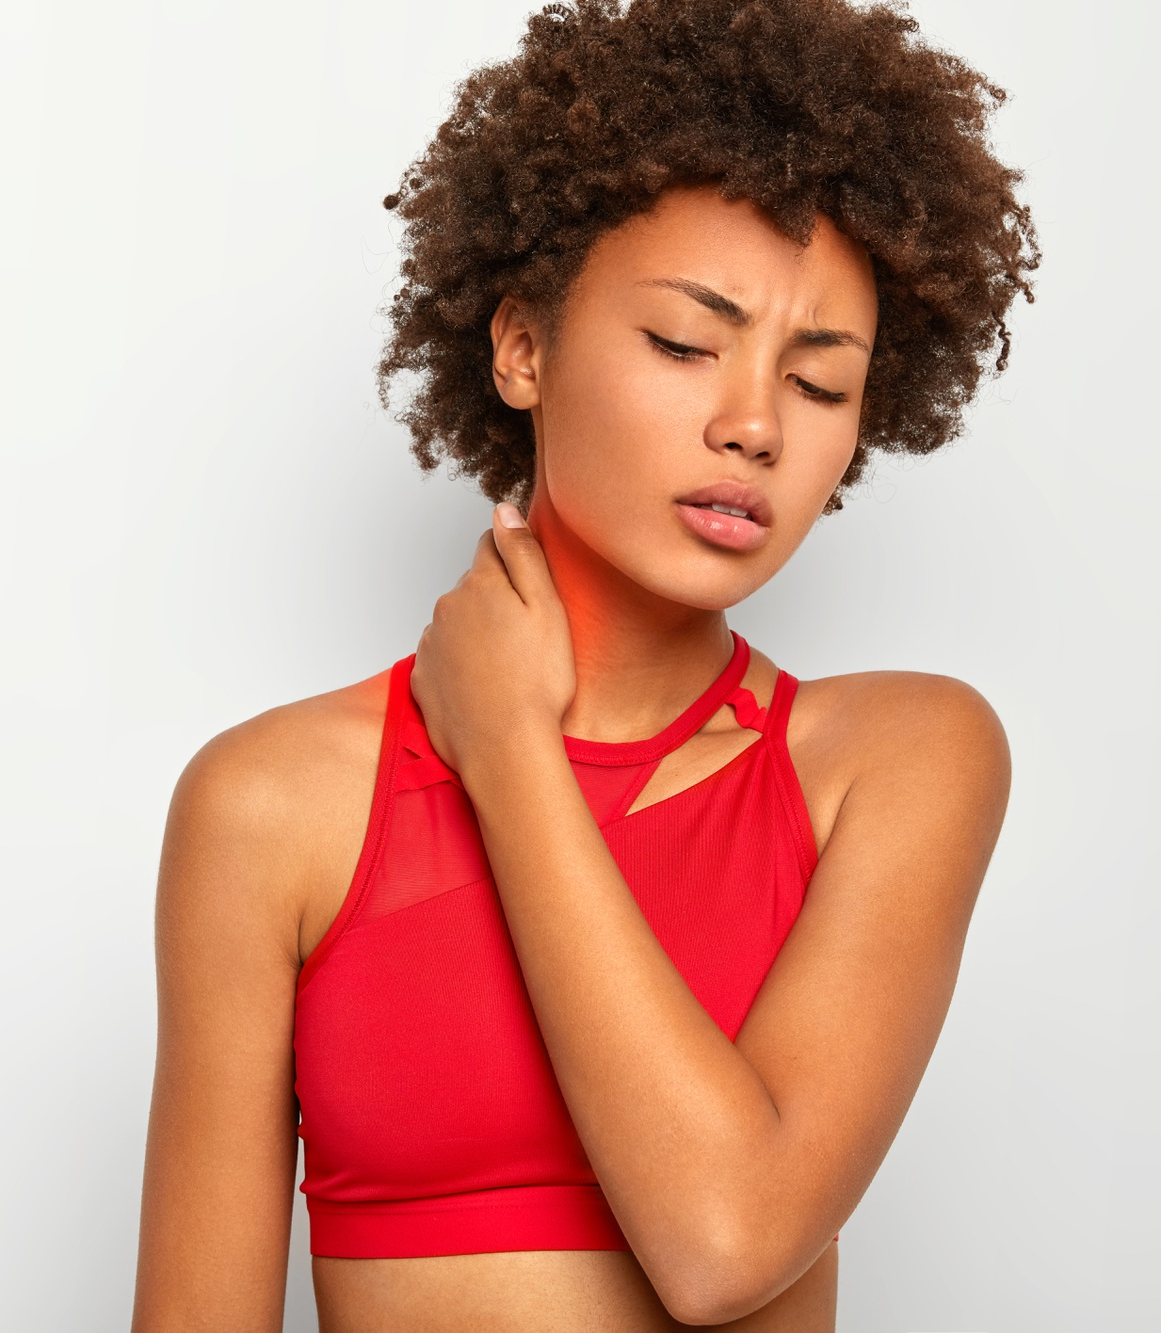 tired-curly-young-woman-touches-neck-keeps-eyes-closed-wears-red-top-tilts-head-being-exhausted-poses-agaist-white-backround-your-promotional-content_d2208a2c-b773-44fc-9bc5-41566763ceee.png